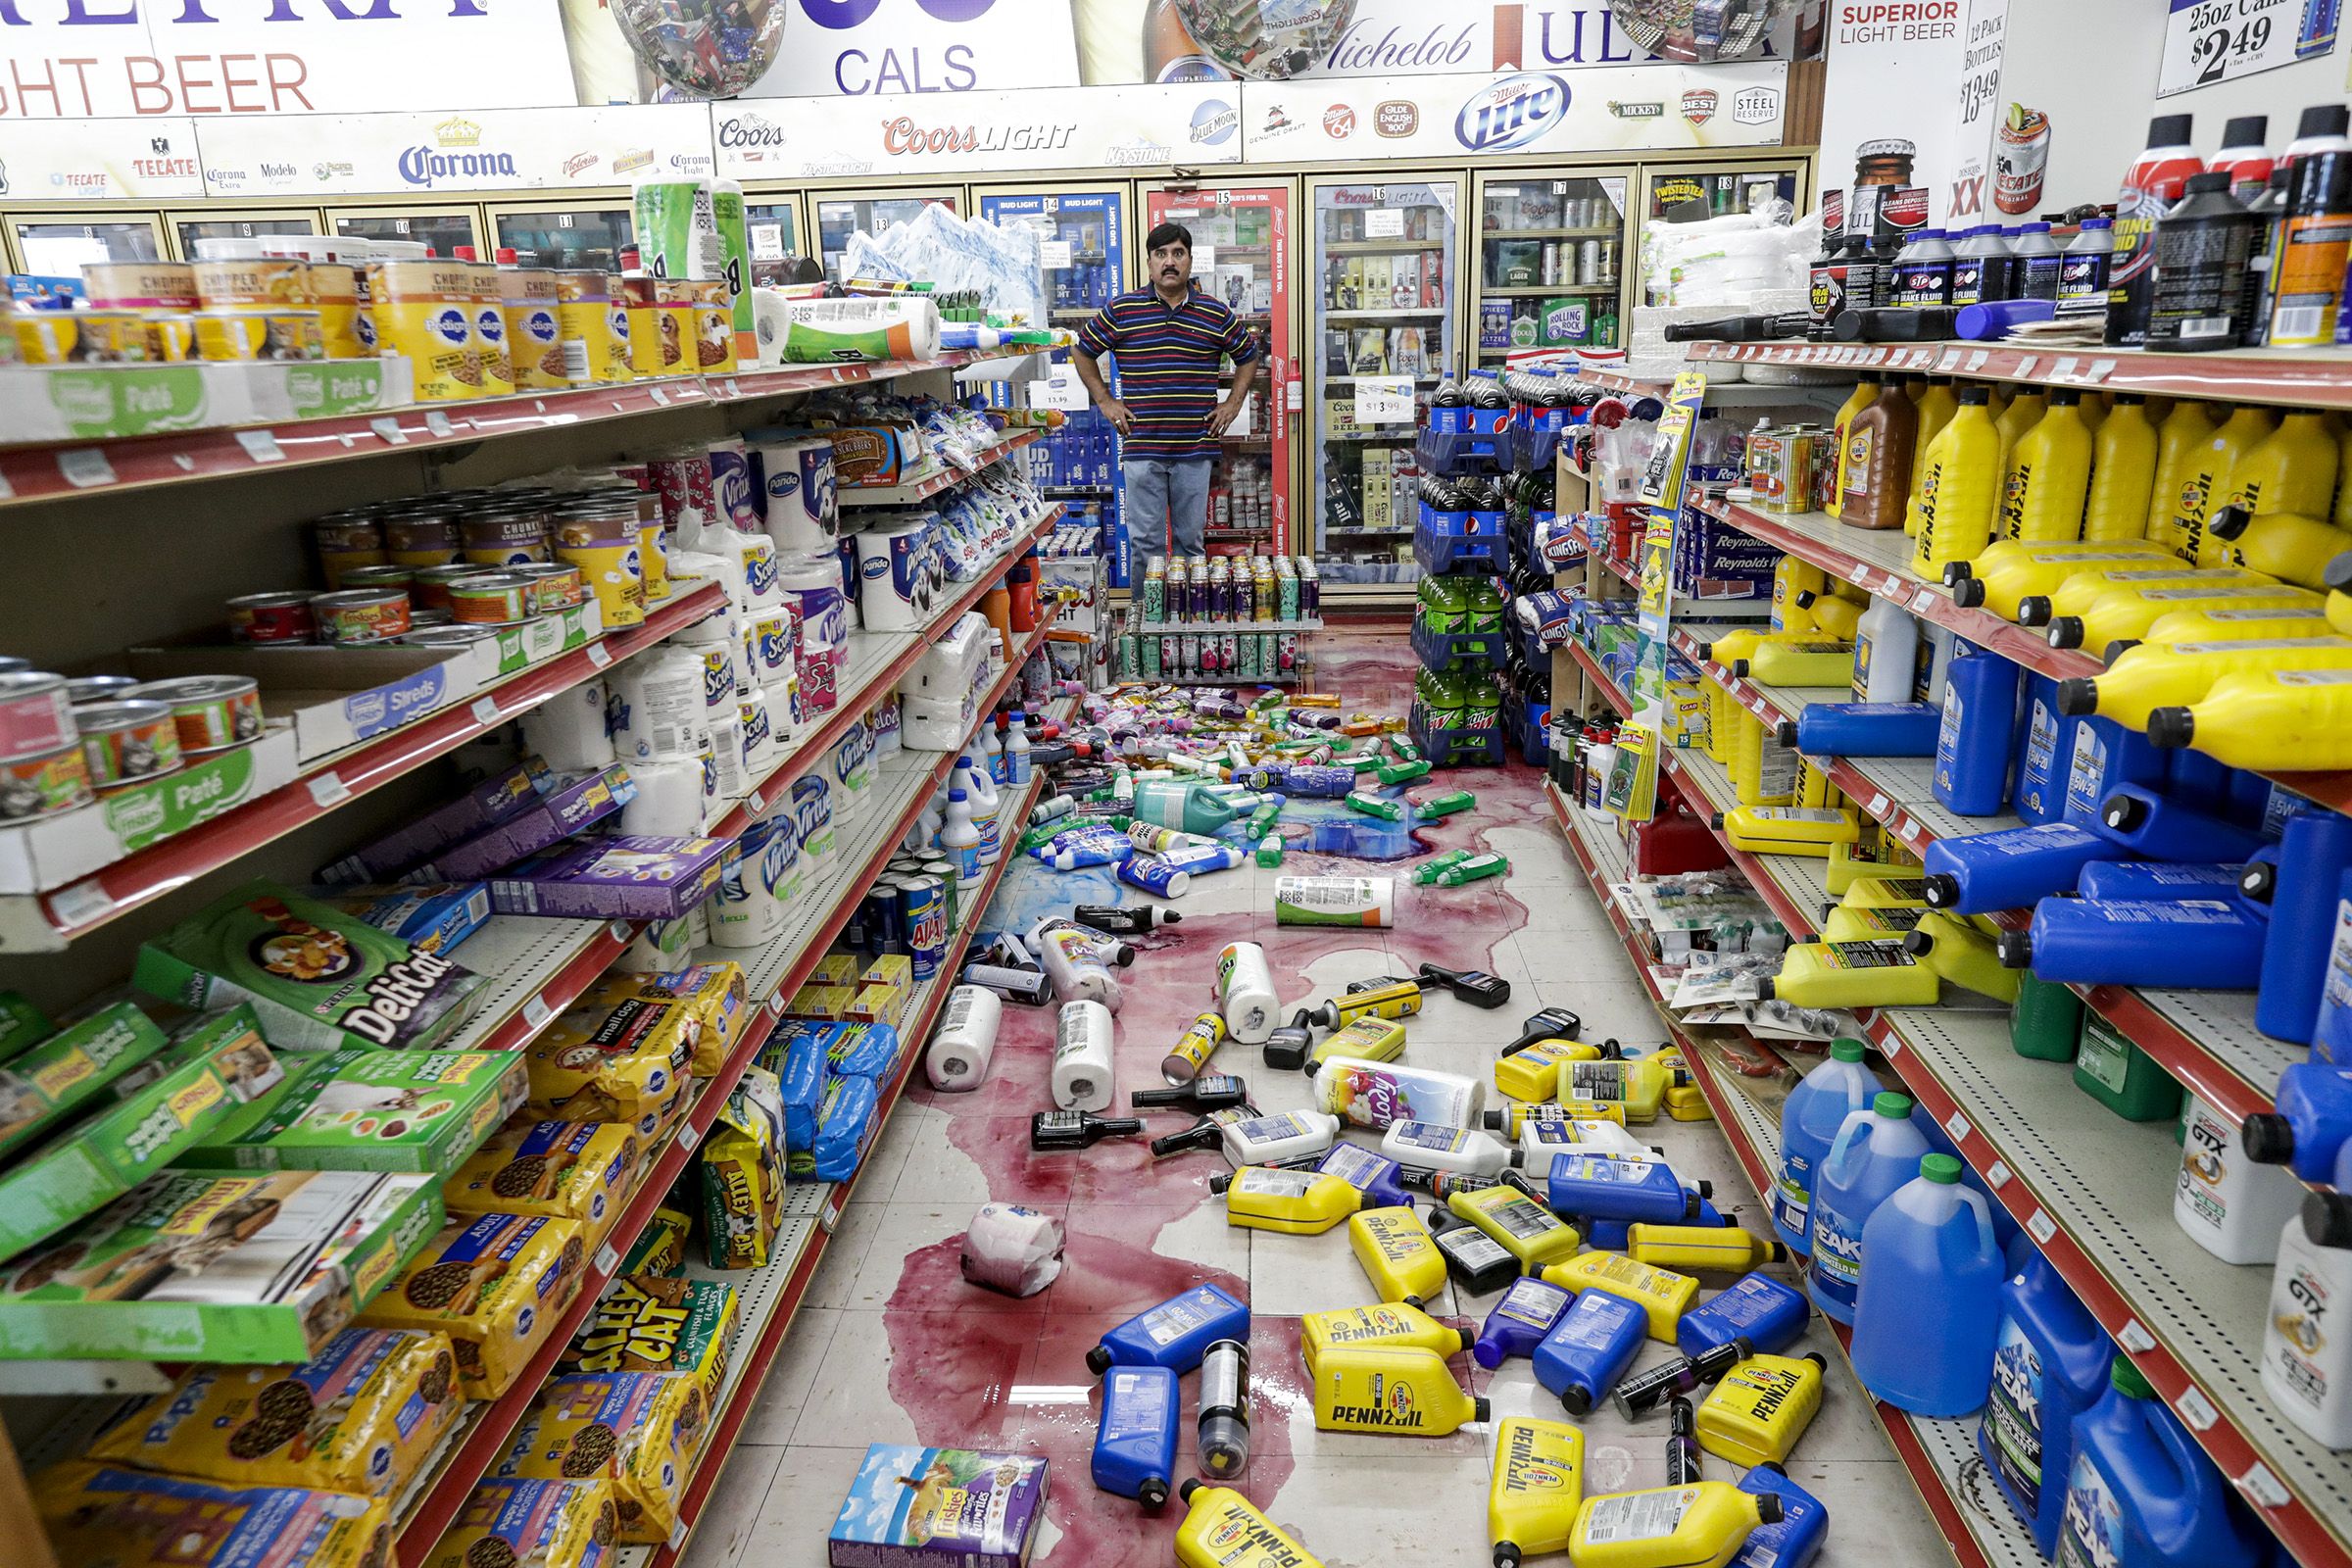 This image shows a man standing in a grocery store aisle covered in spilling bottles.